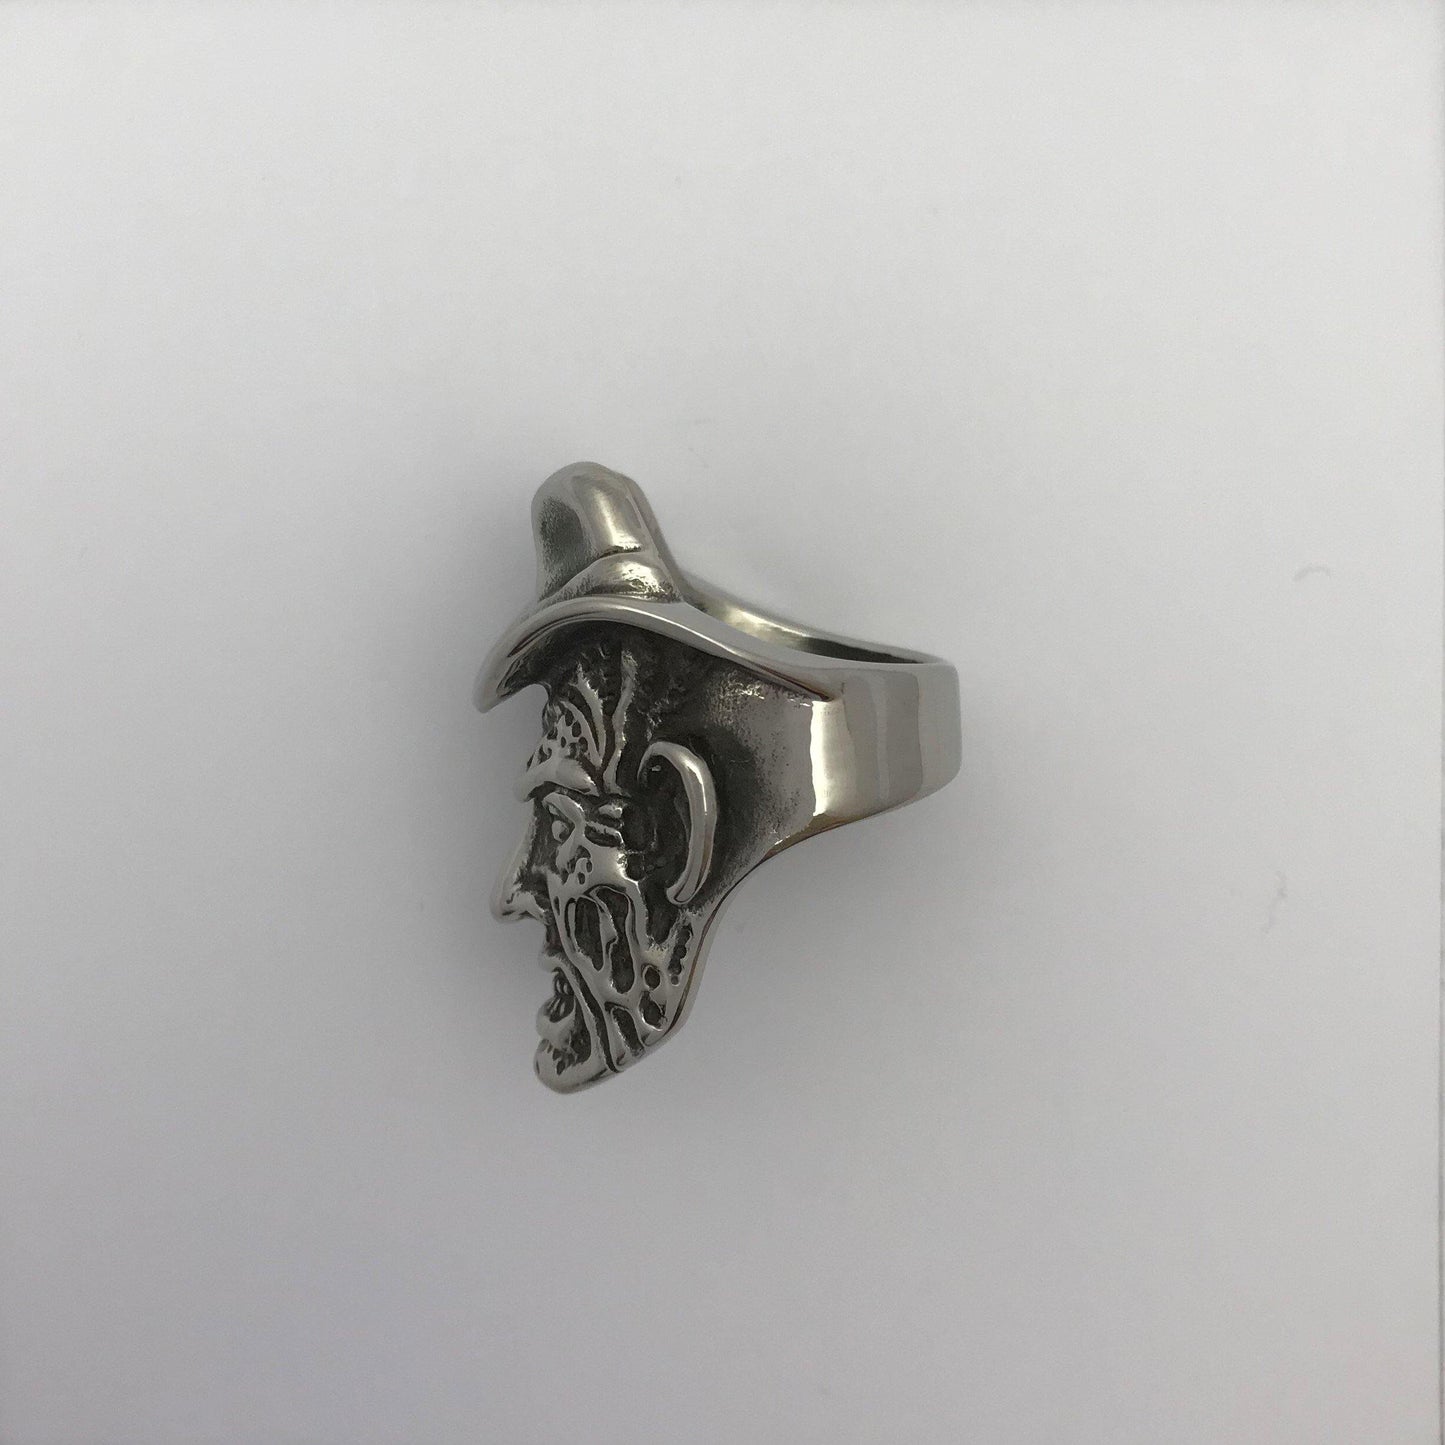 Freddy Ring - Big Dog Steel Surgical Stainless Steel